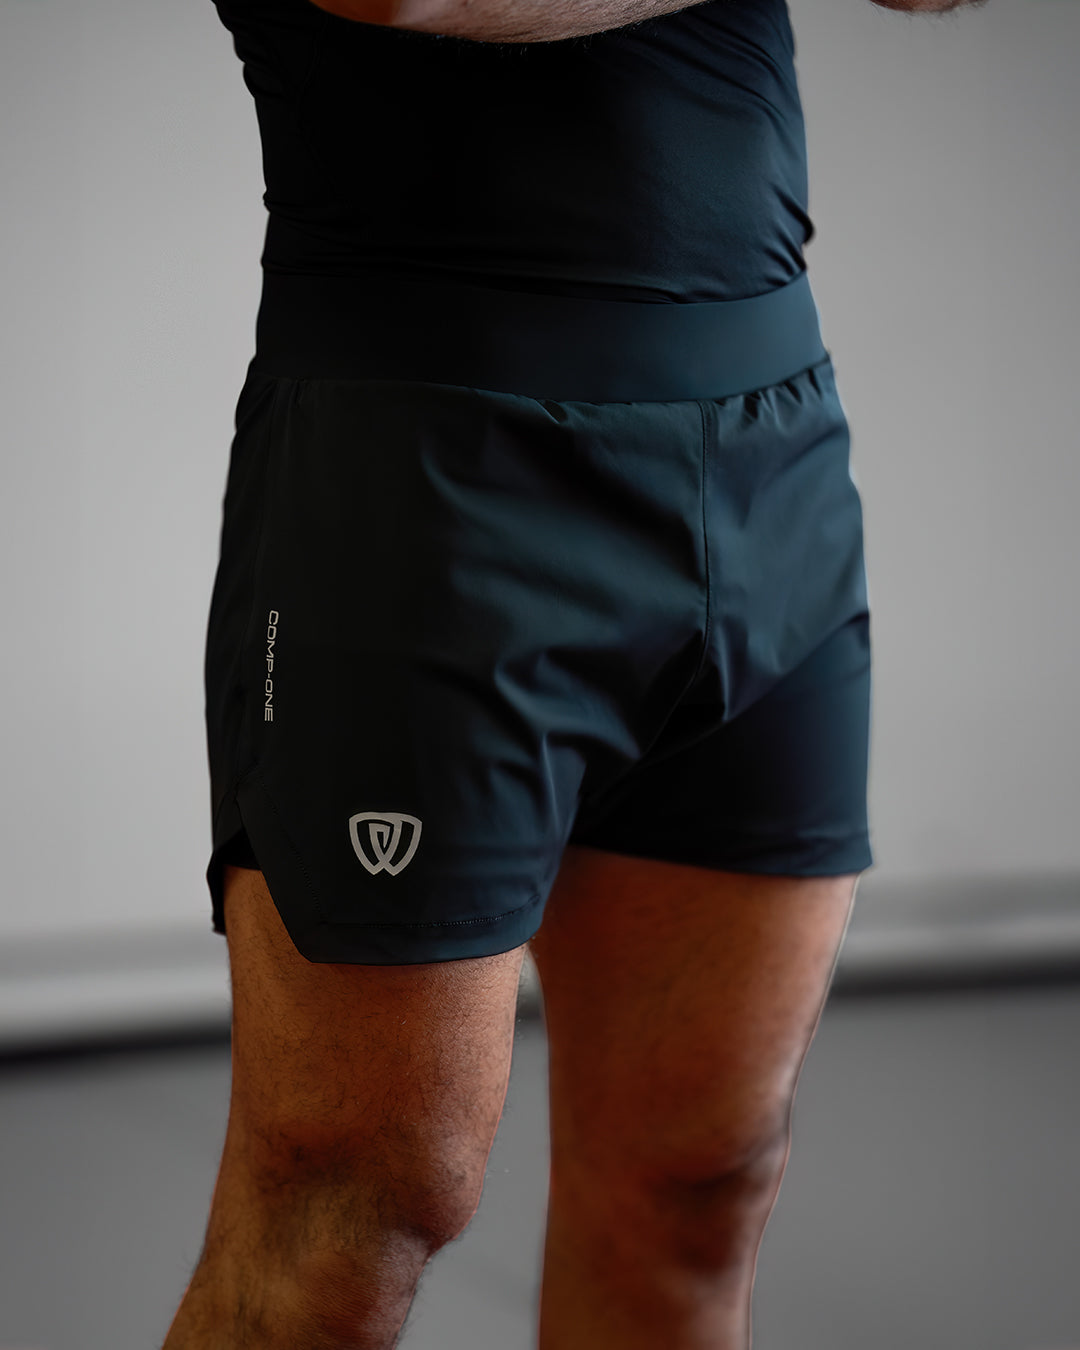 Phalanx jiu jitsu fight shorts for BJJ and MMA, compression shorts perfect for No Gi Jiu Jitsu or Brazilian Jiu-Jitsu and Mixed Martial Arts - all grappling and wrestling Spartan Race, Tough Mudder, Surfing, Yoga - all athletics! Workout clothes for a wide range of everyday sports, gym wear and exercise activities.